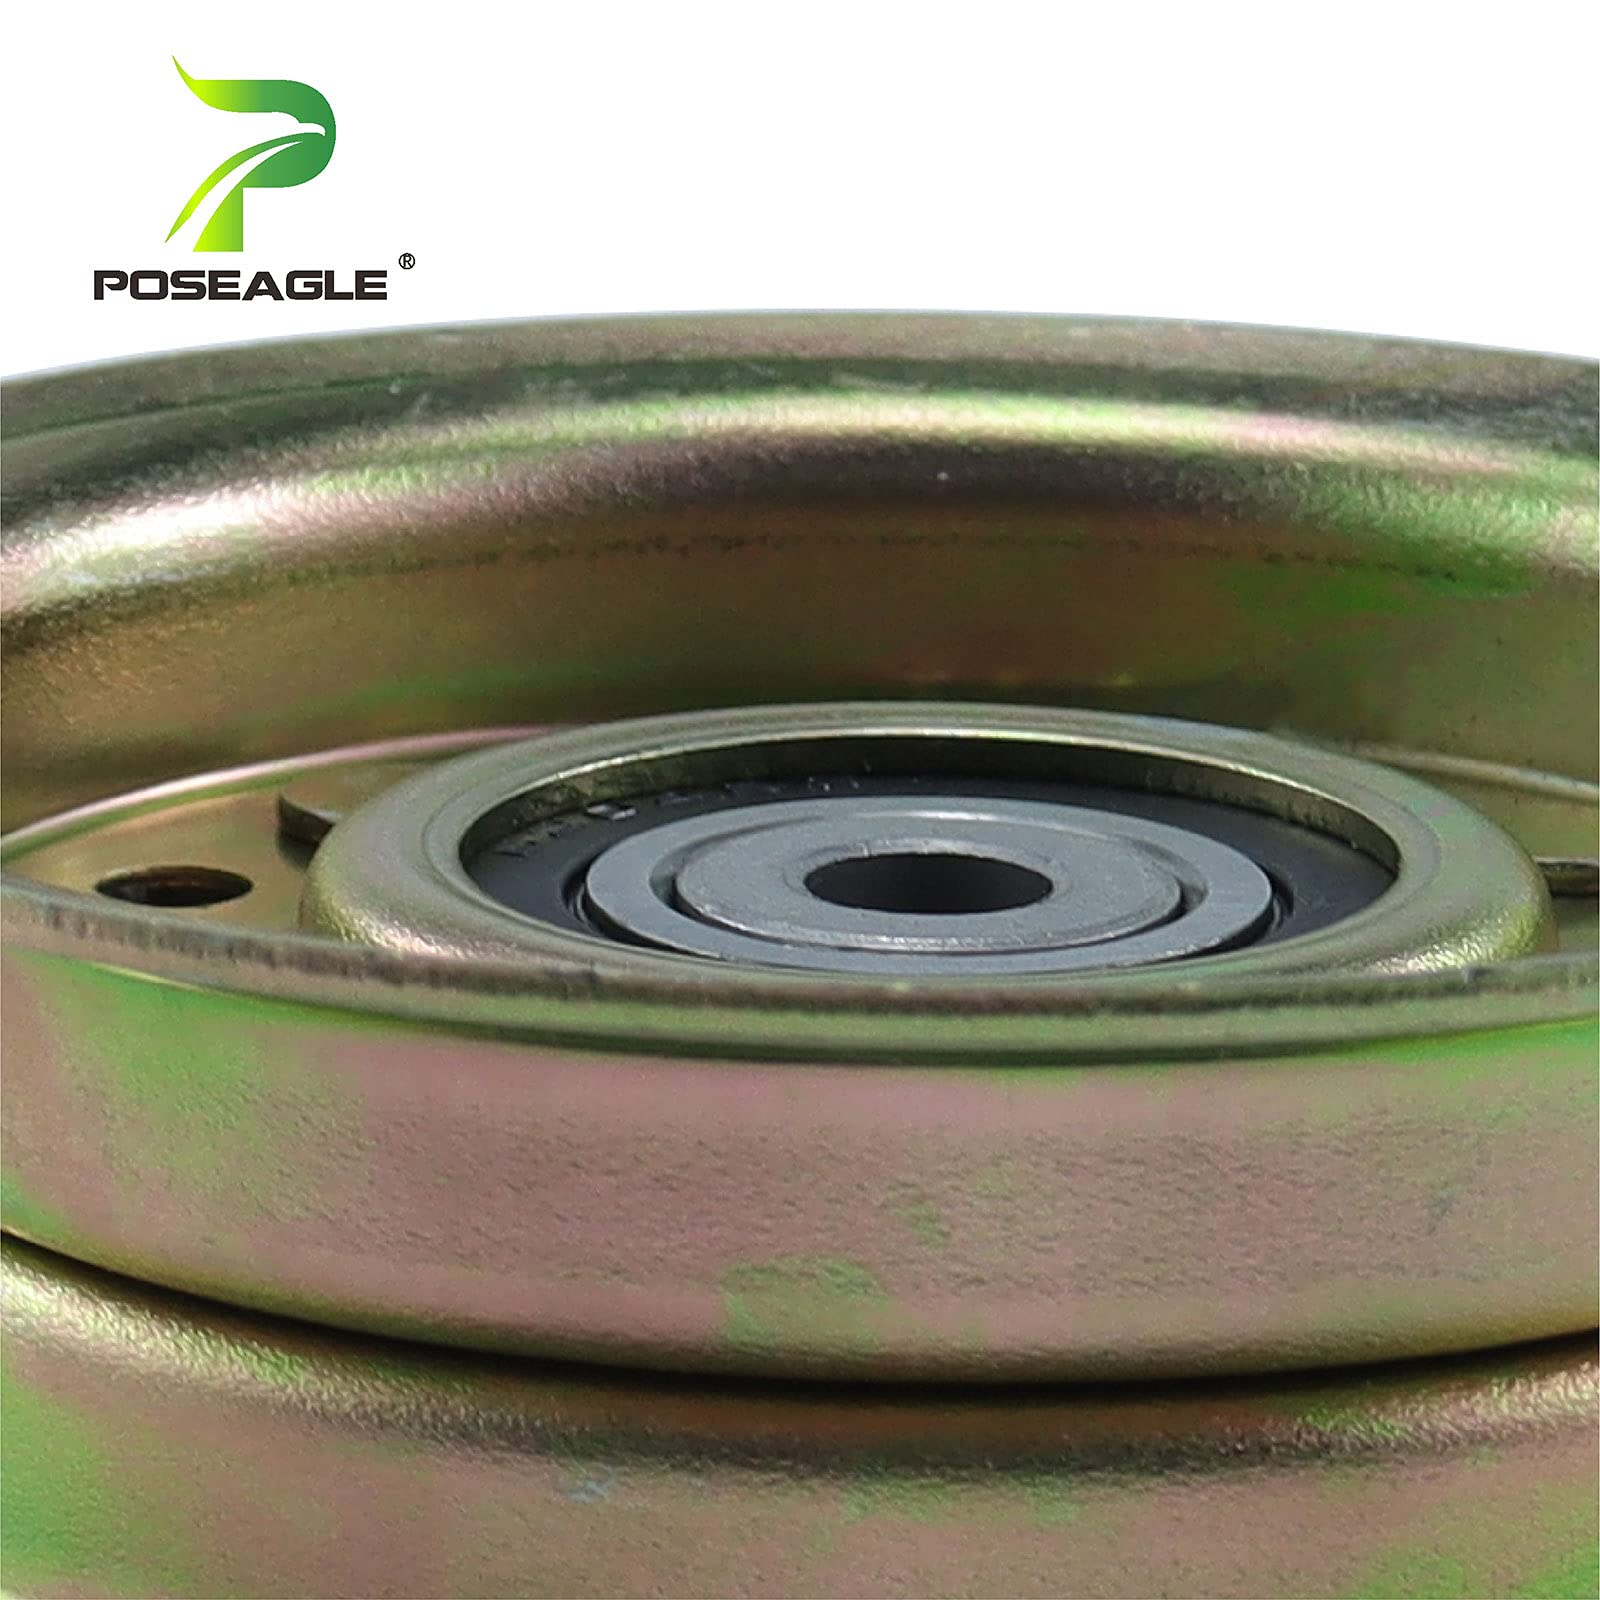 POSEAGLE 532173901 Idler Pulley Replaces Craftsman 156493 Idler Pulley Craftsman Pulley 156493, Lawn Mower Idler Pulley 156493, Craftsman Idler Pulley 156493 Pulley, 173901, 532156493, Oregon 78-053